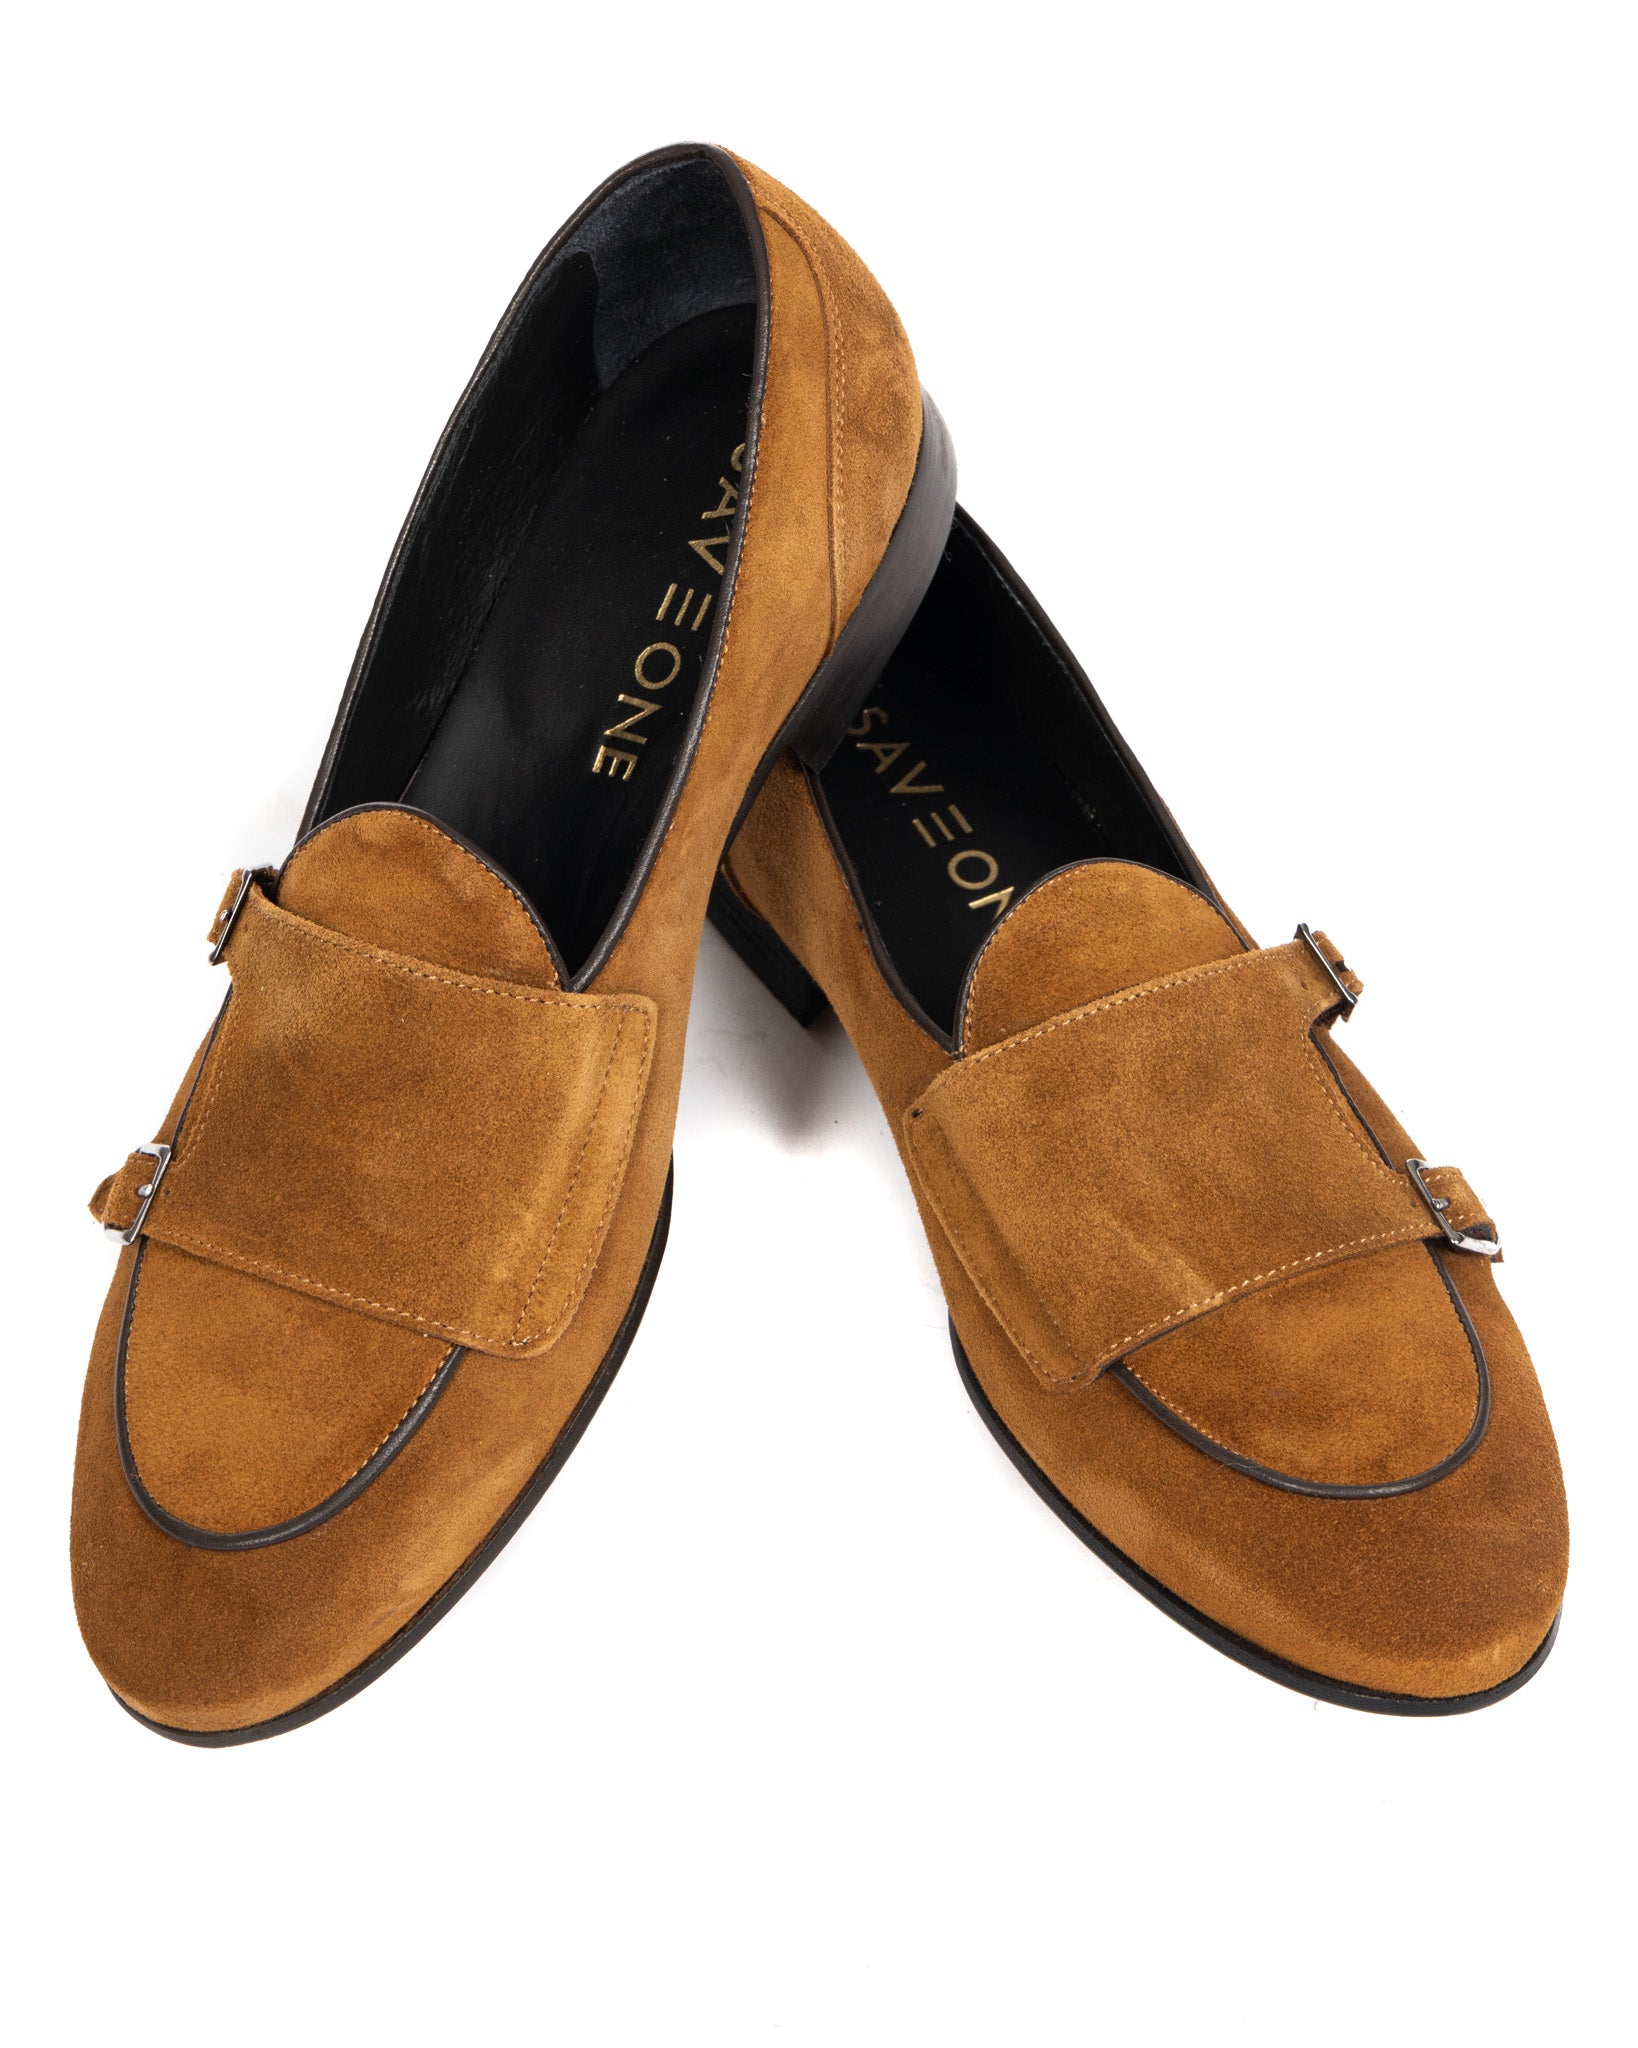 Gianni - camel suede moccasin with double buckle